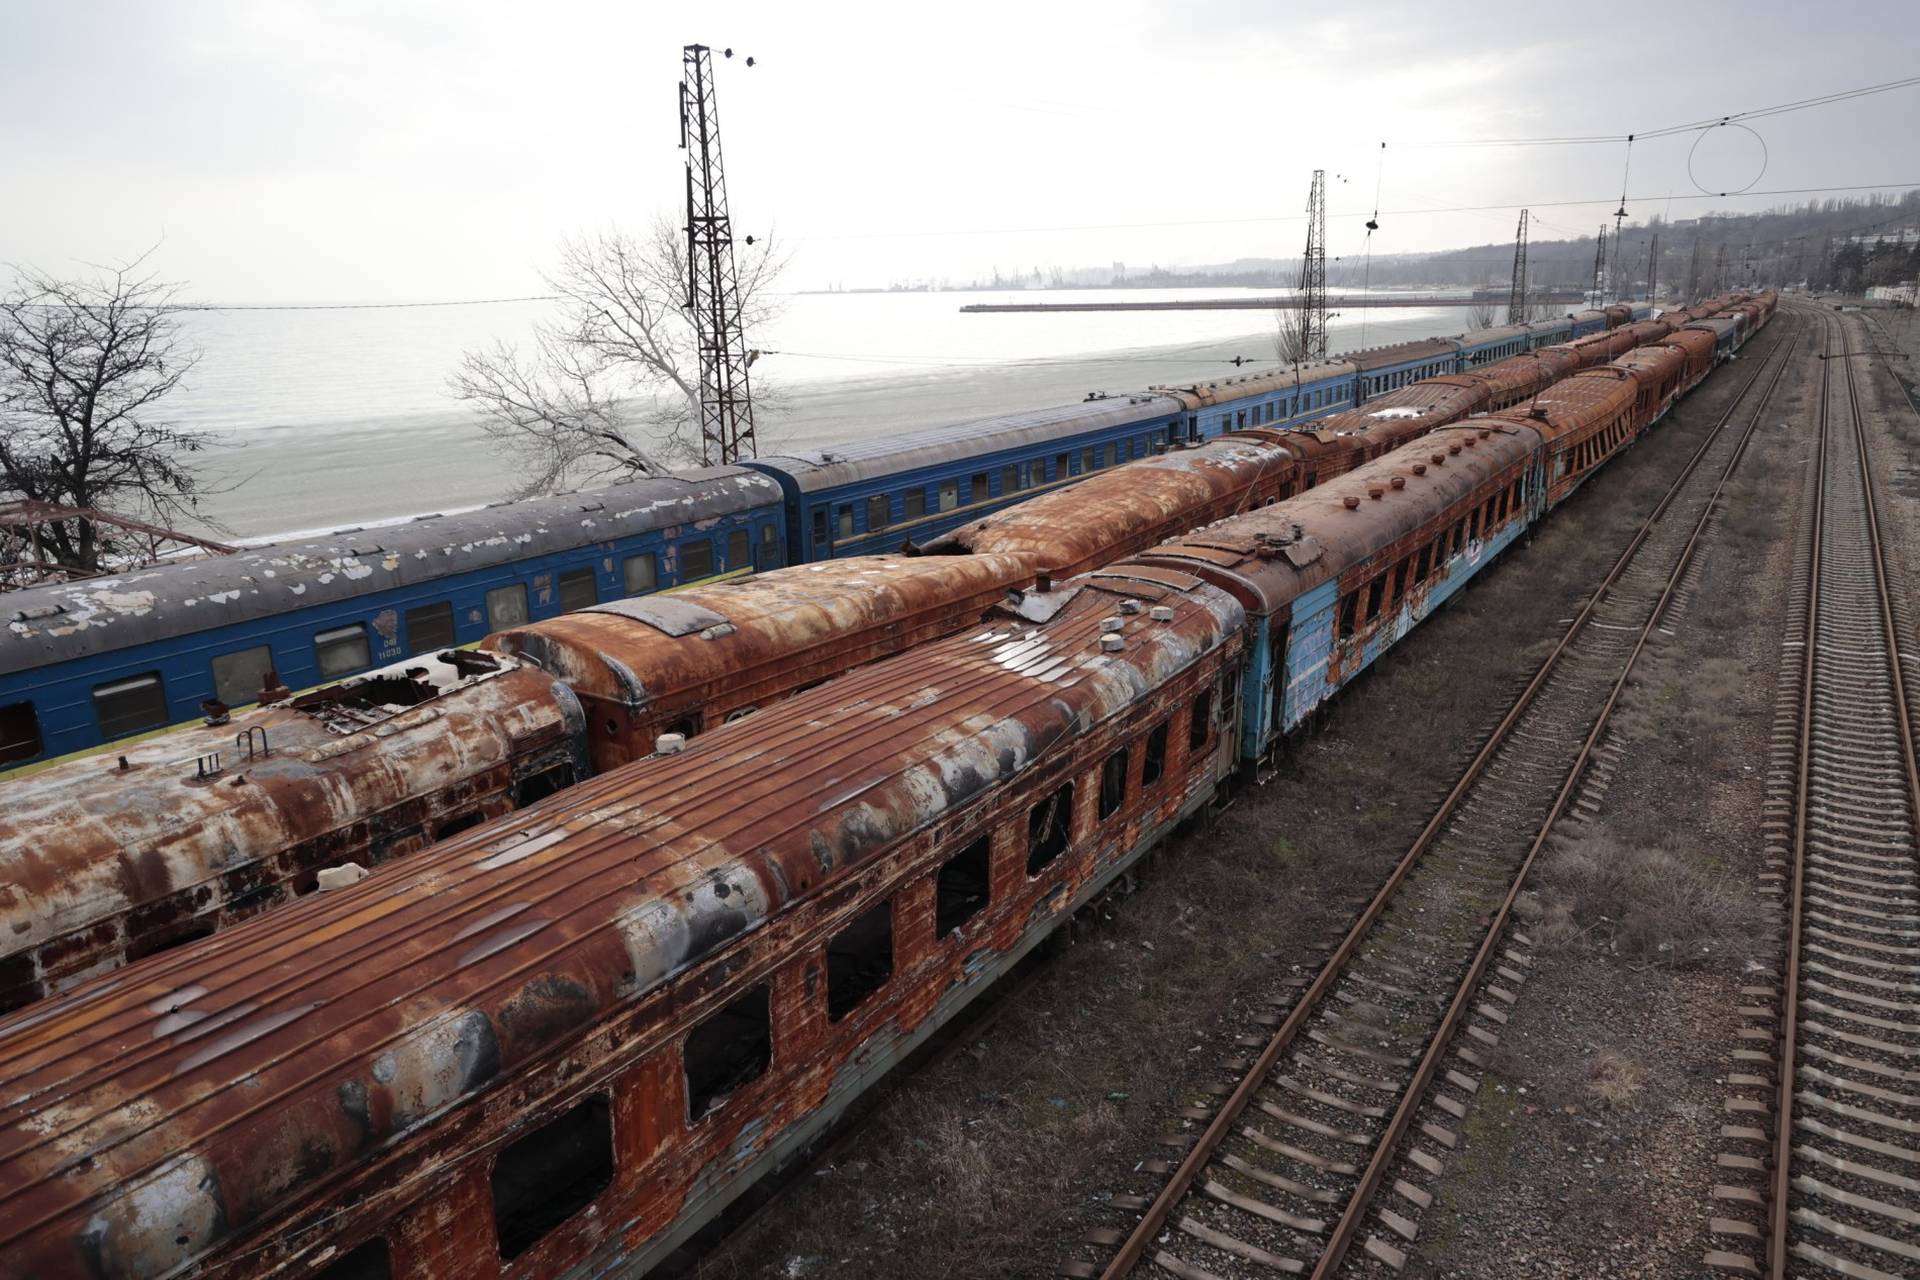 burned-out railway cars on Mariupol’s main beach, and a partly frozen Sea of Azov